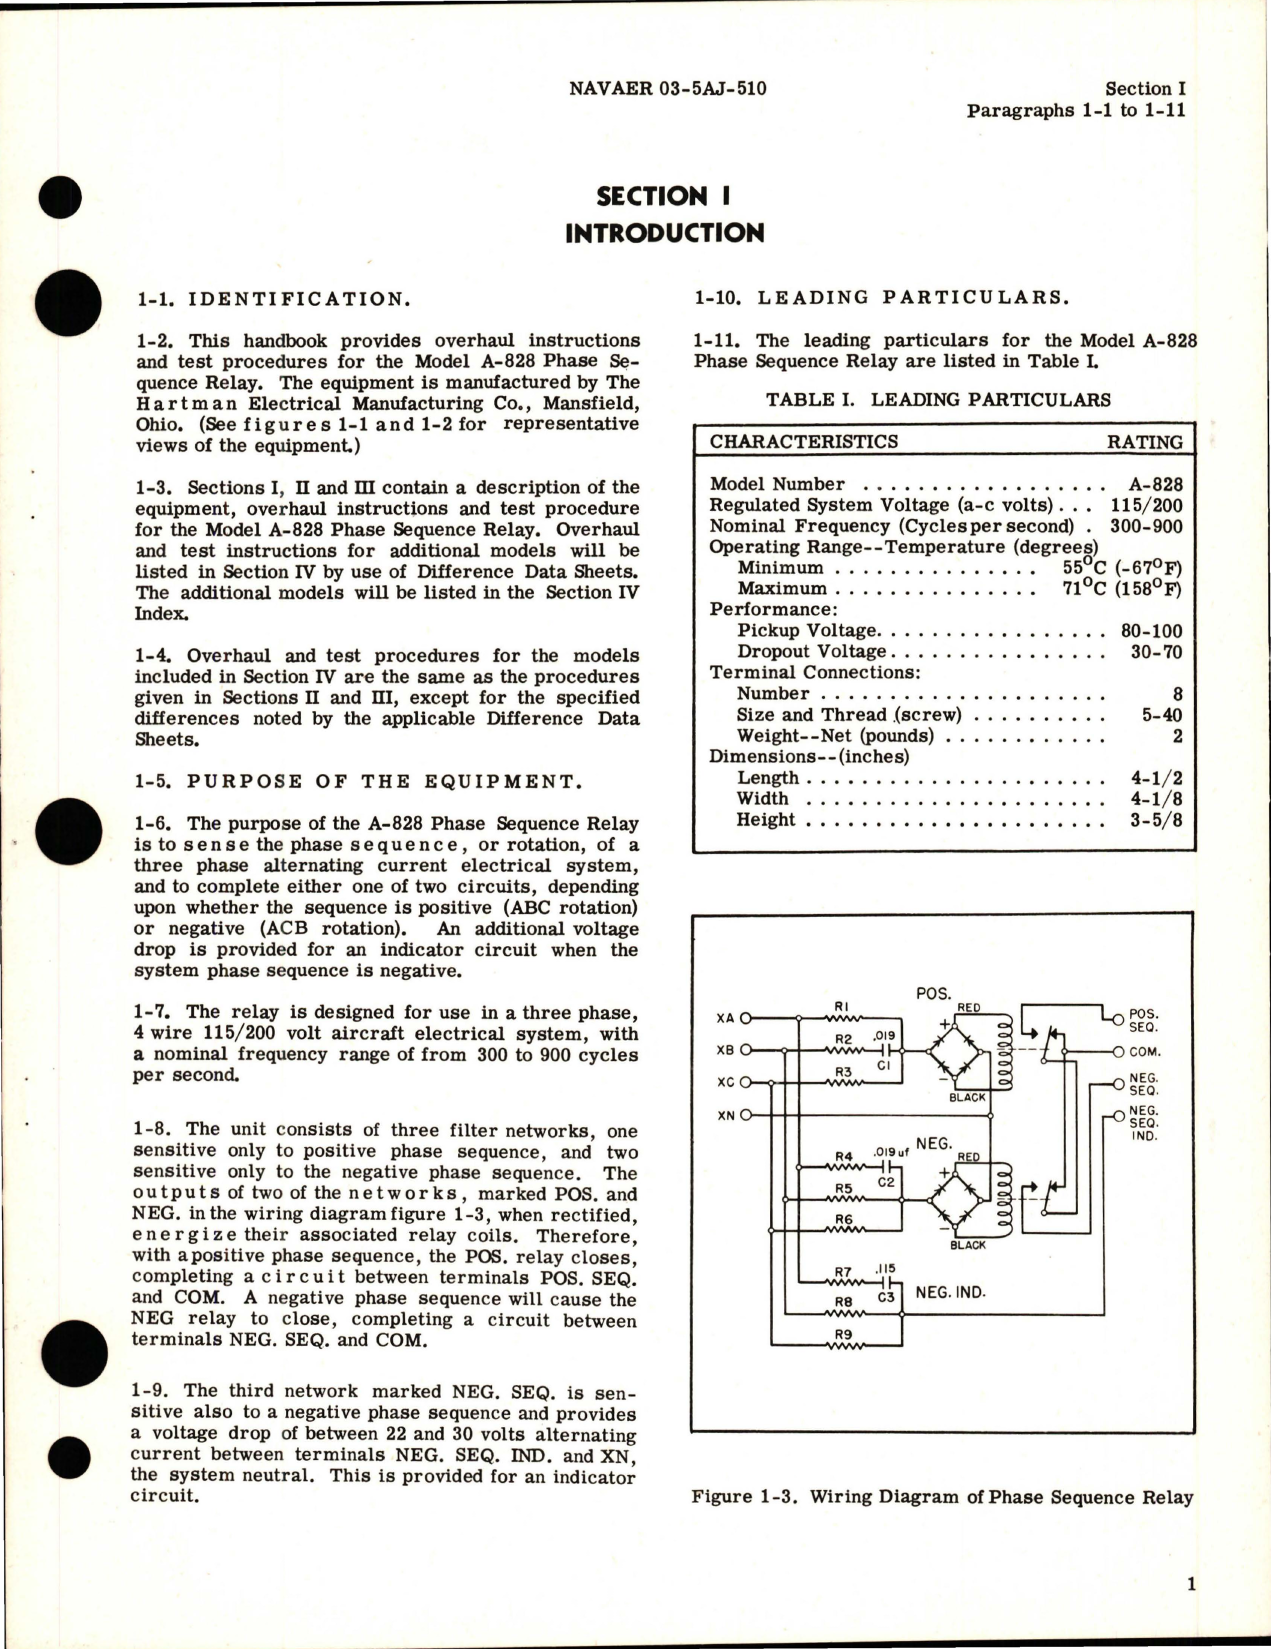 Sample page 5 from AirCorps Library document: Overhaul Instructions for Phase Sequence Relay - Model A-828